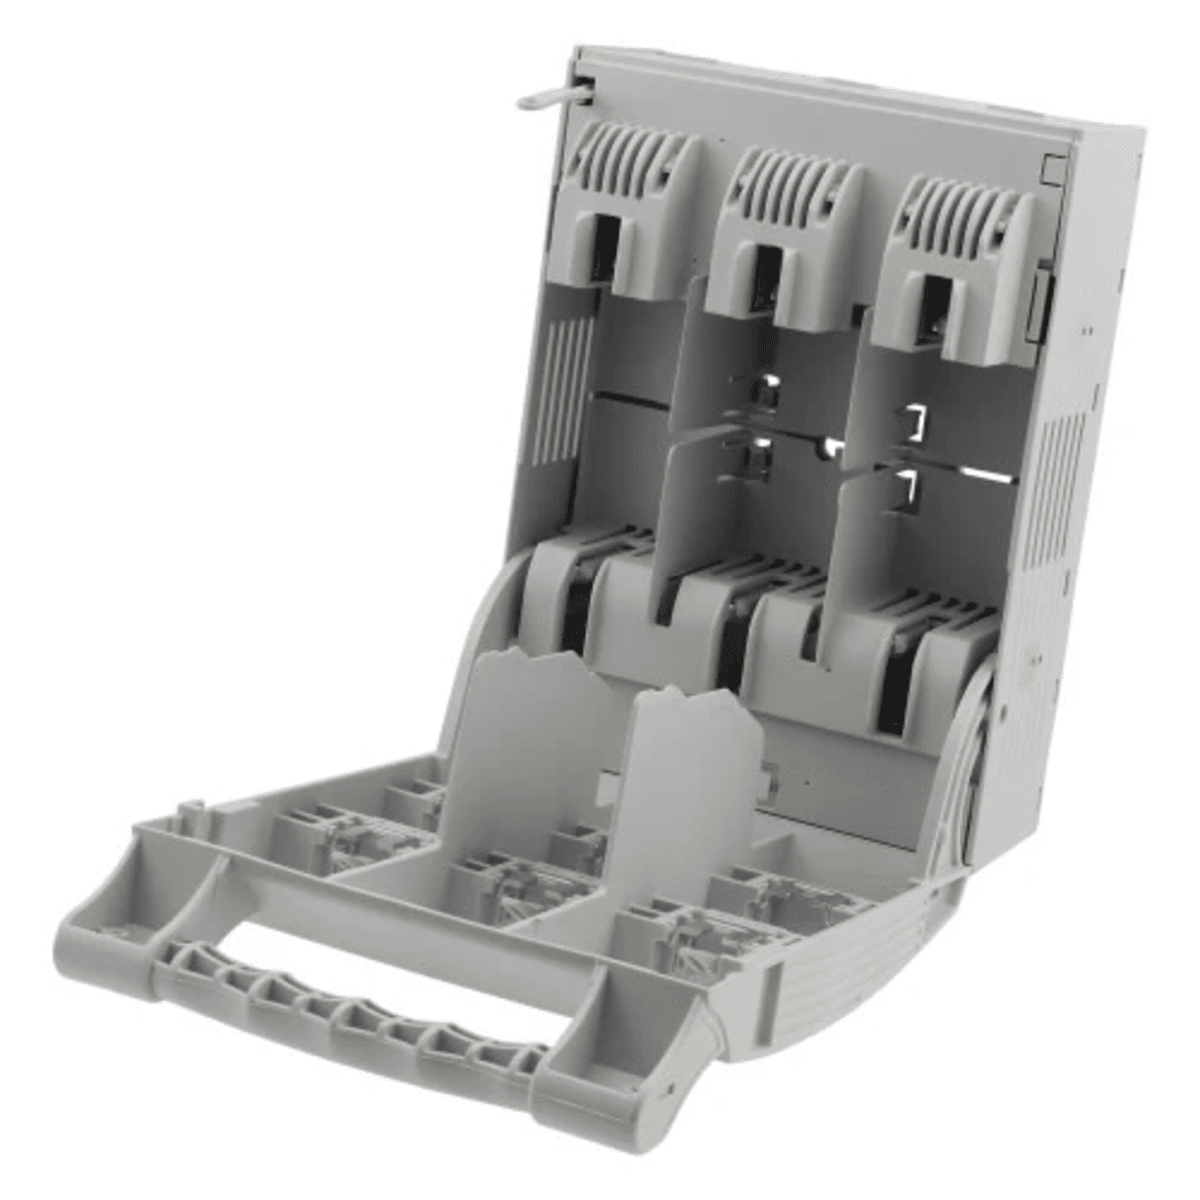 Eaton Bussmann KETO-1 Battery Disconnector with 125A Fuses